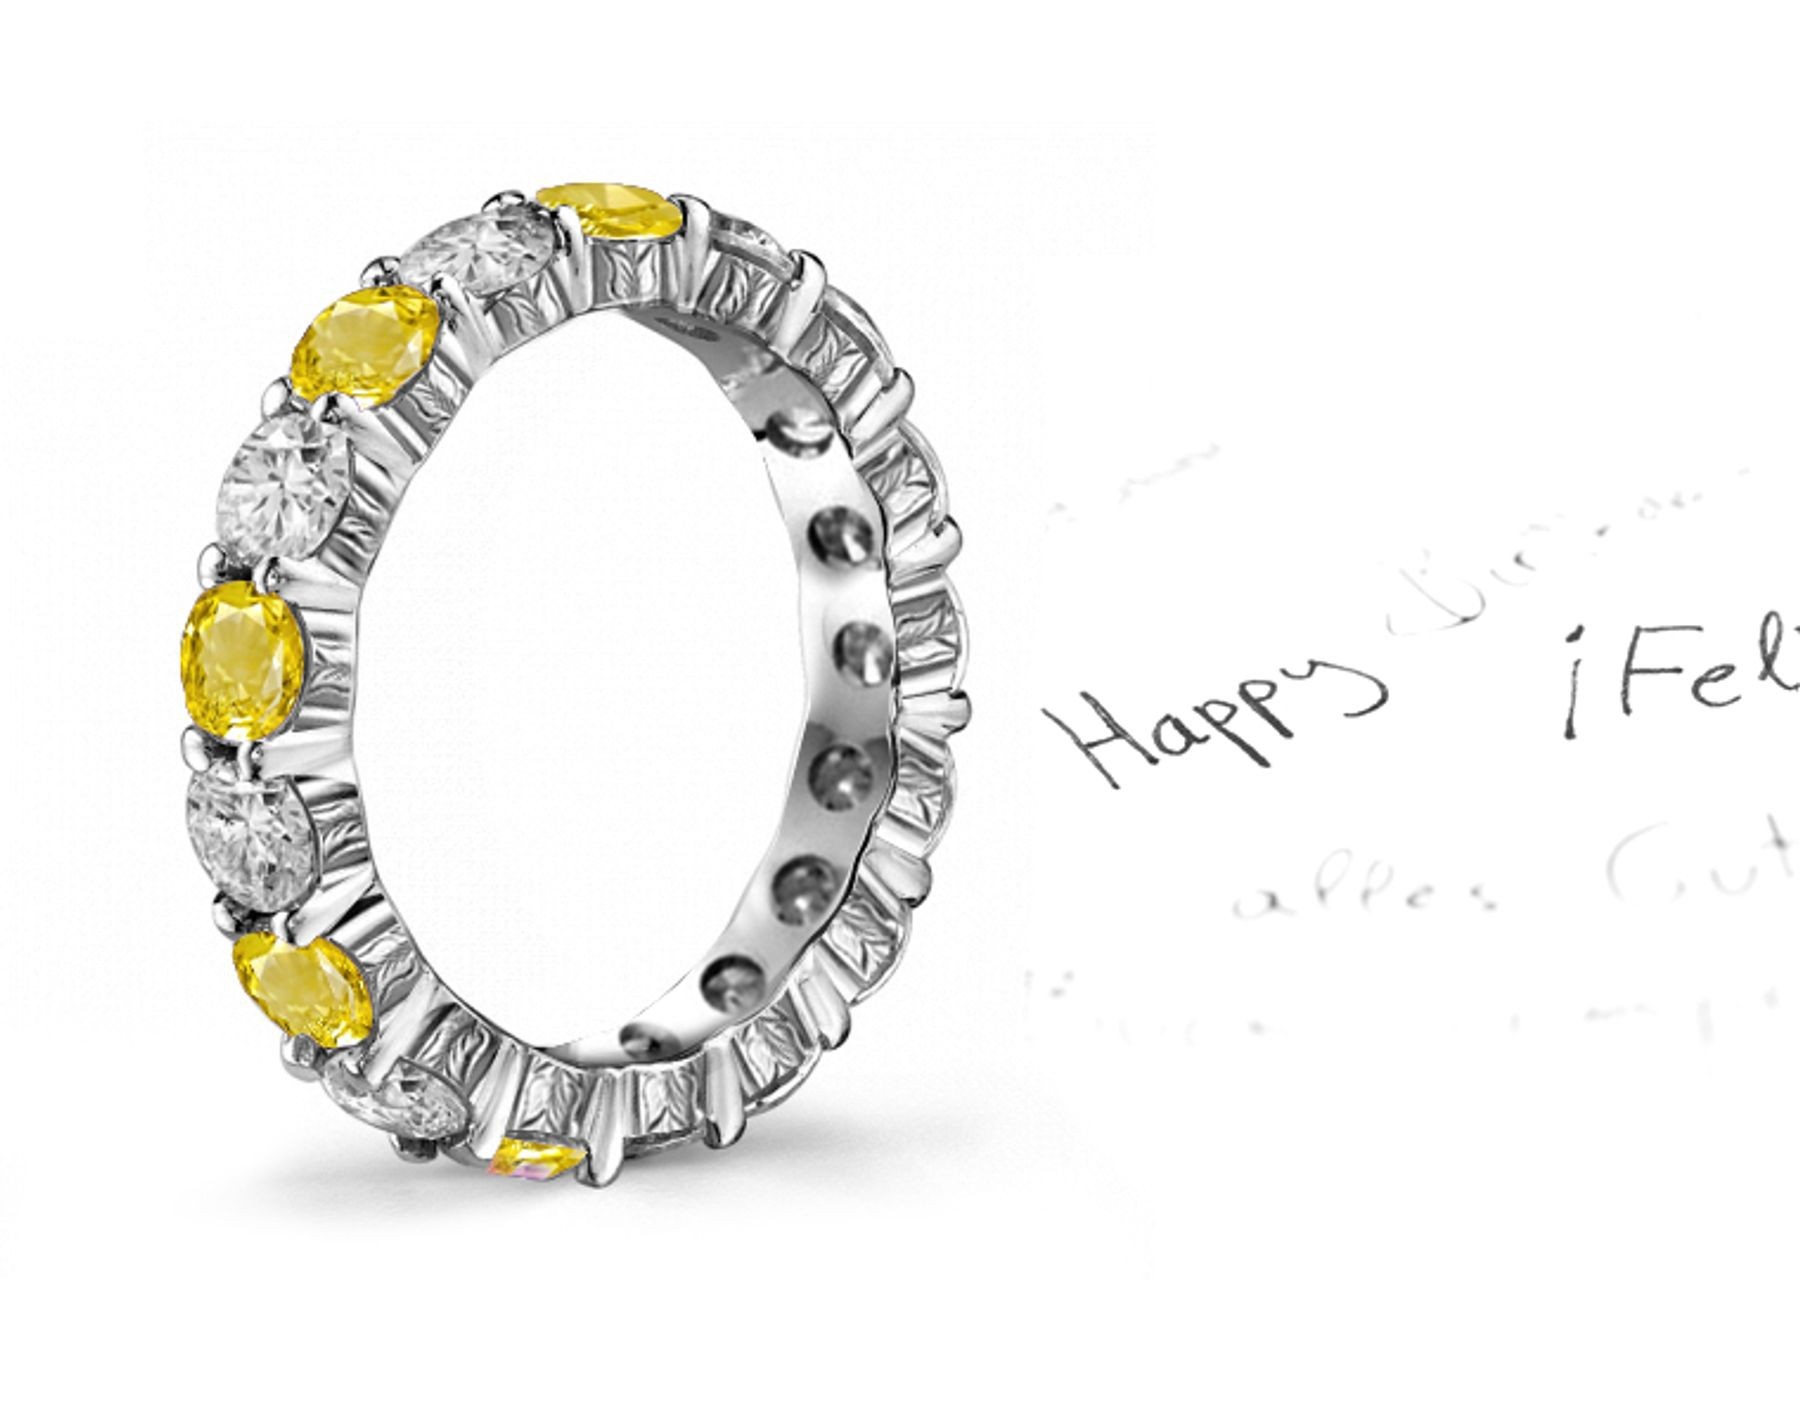 Time Travel Experiment: Hand Crafted Yellow Sapphire & Diamond Ring with Fire & Smoke